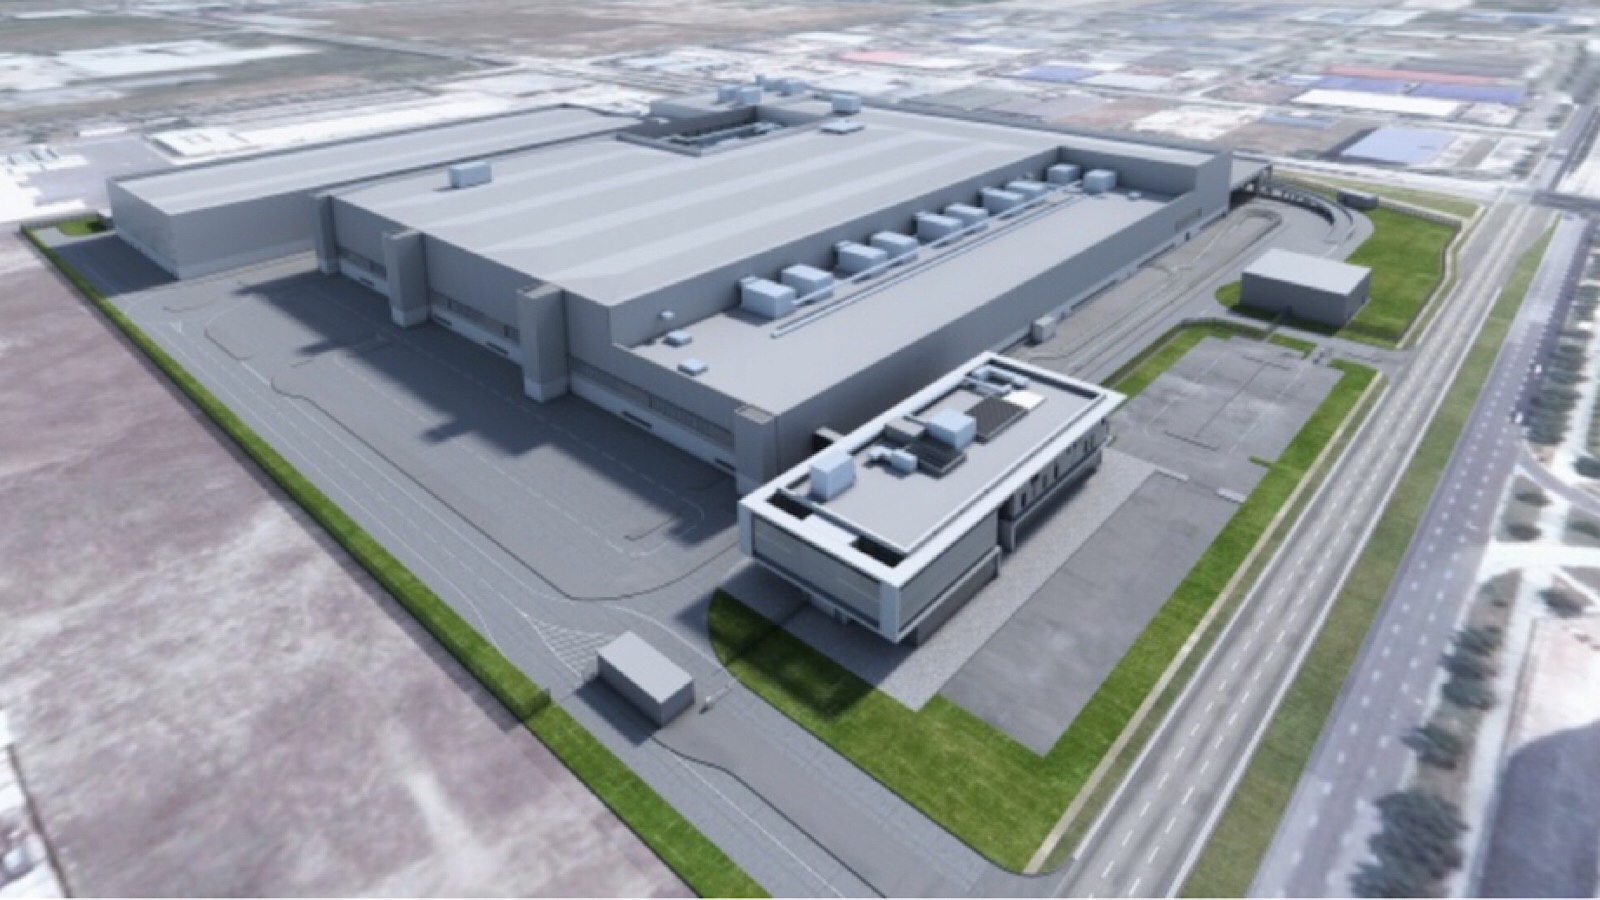 Dyson's electric car manufacturing plant being built in Singapore